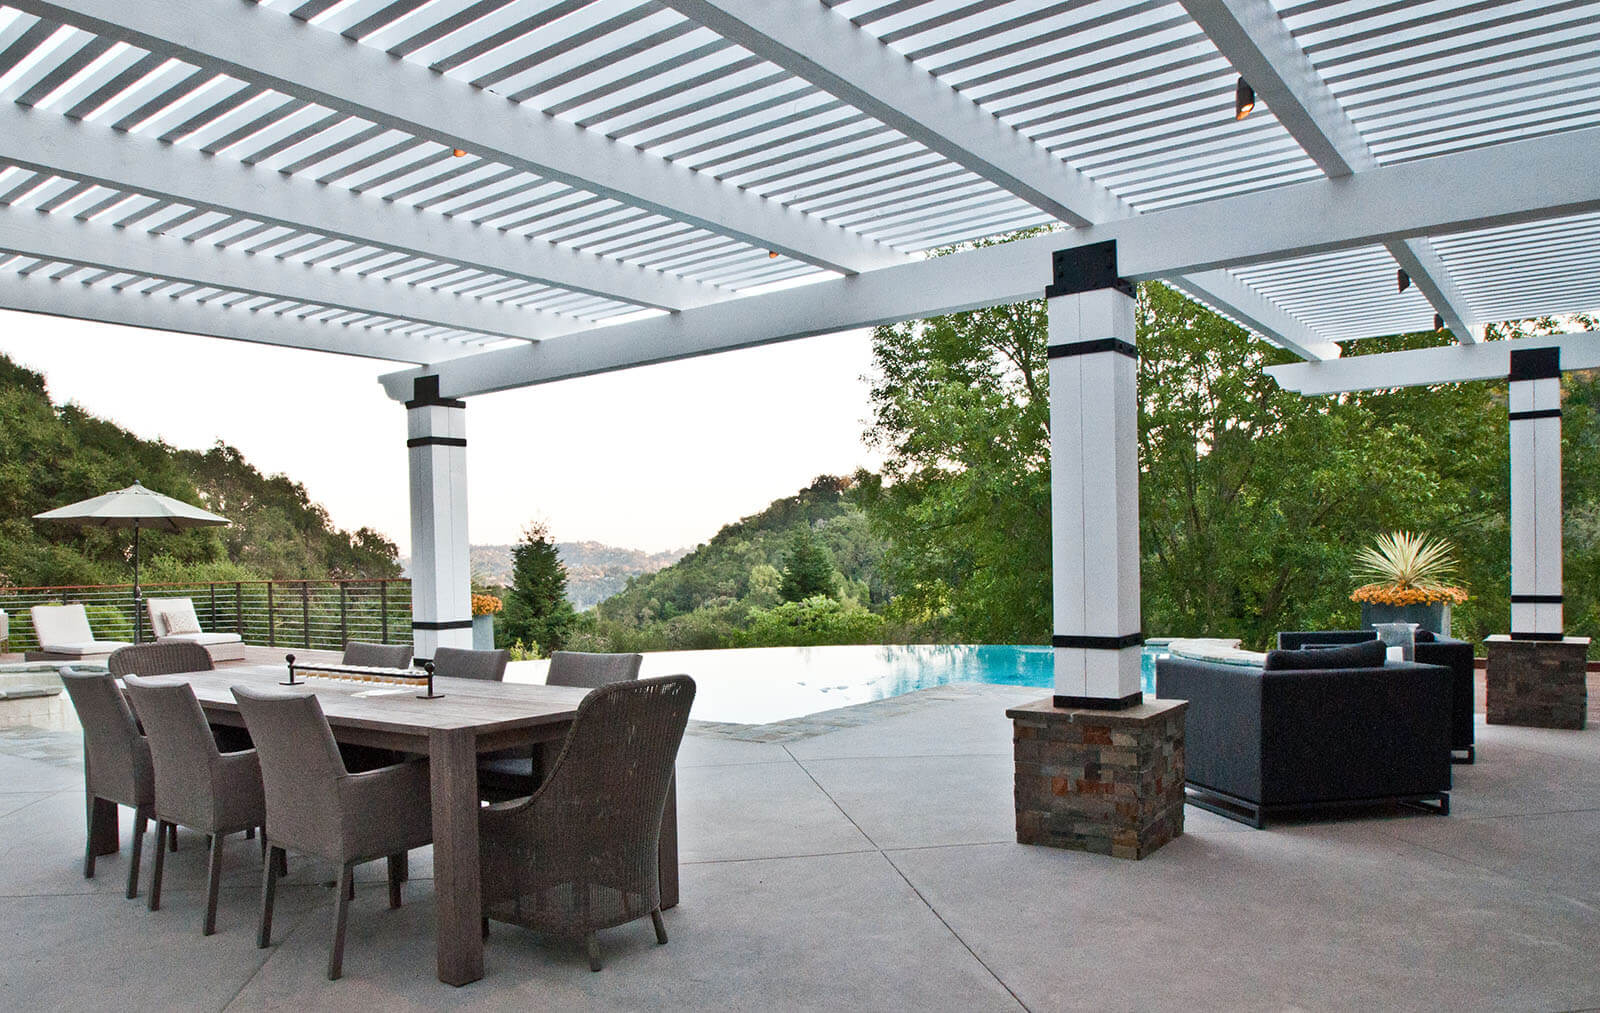 Large slat roofed, stone tiled patio, with white columns and wrought iron fixtures with stone tile bases, washed wood dining set and a view of the edgeless pool overlooking green lush valley landscape